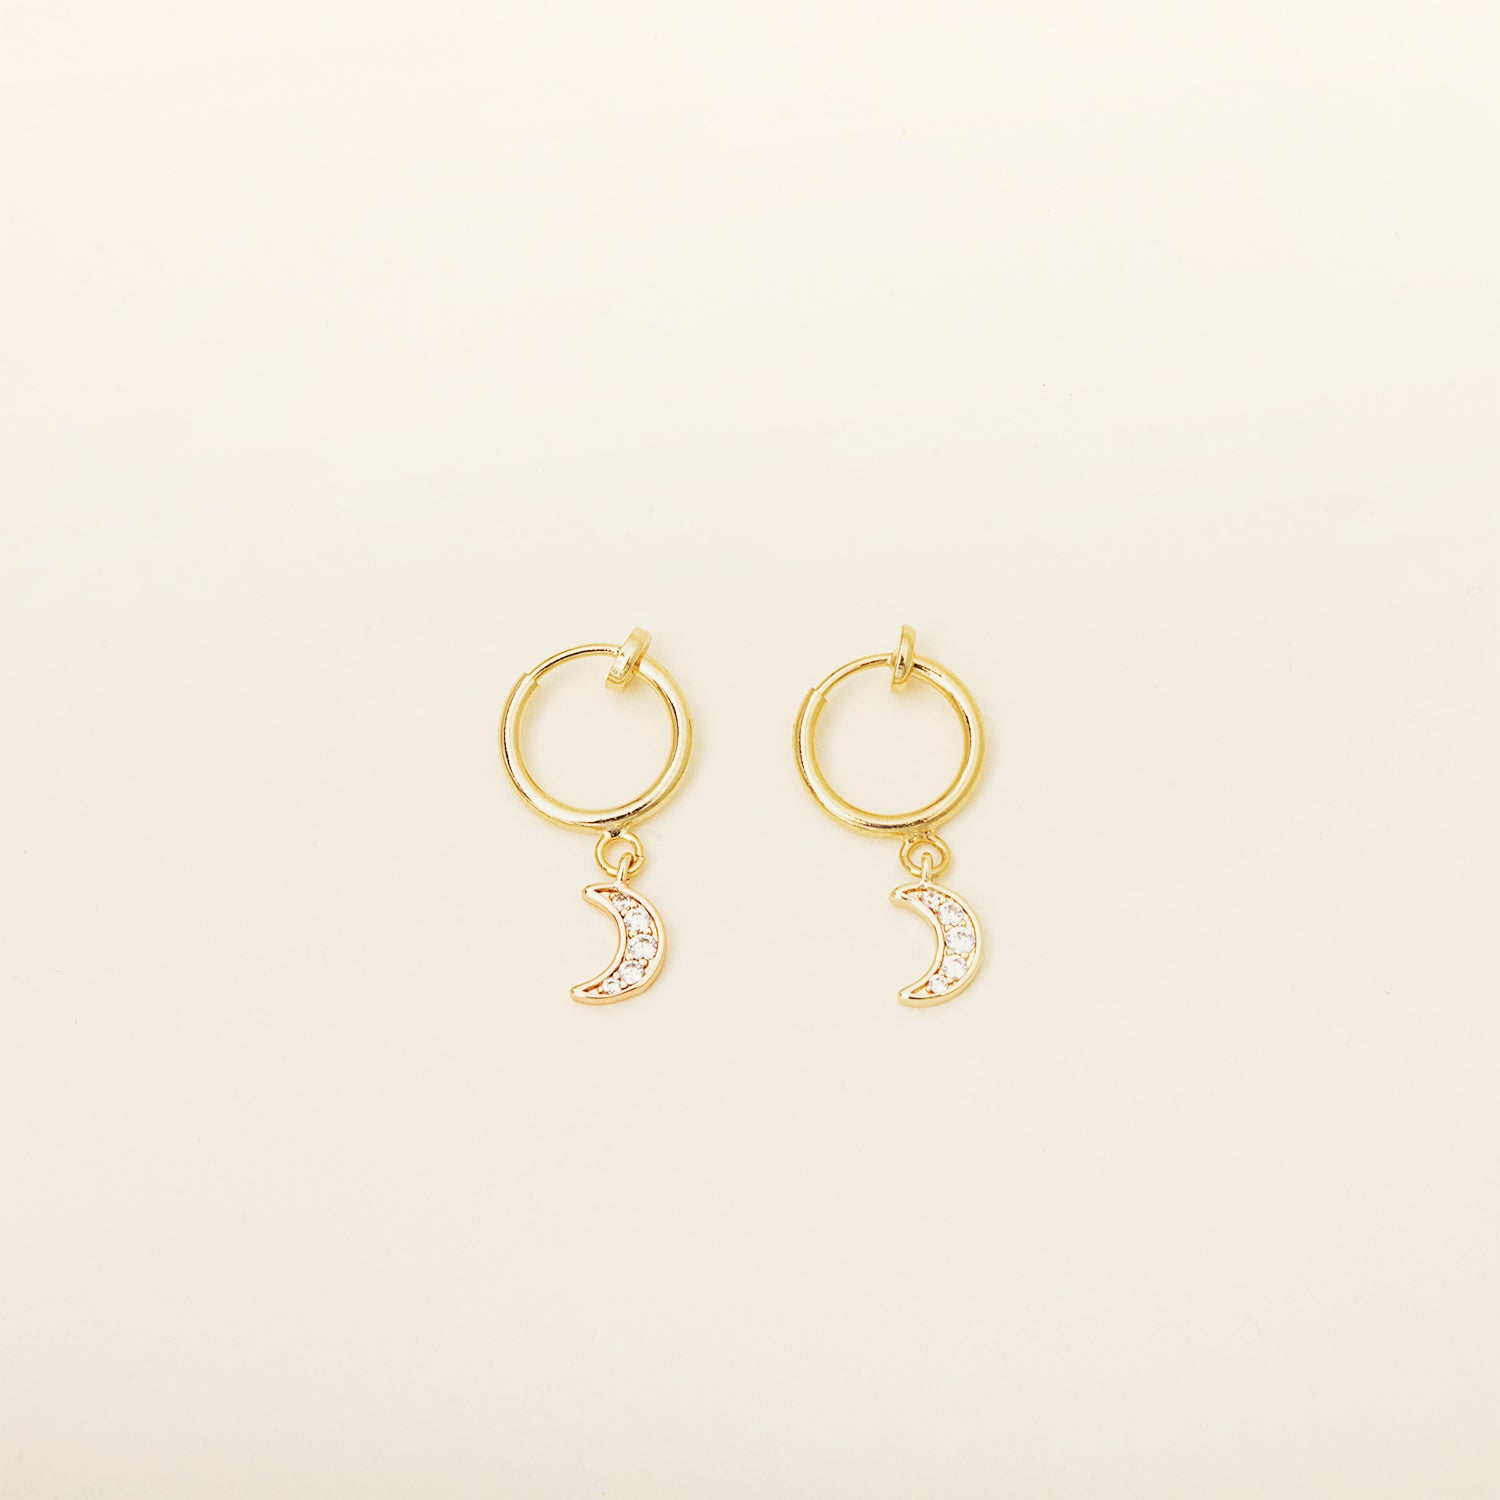 Image of the Moon Charm Clip on Earrings feature a sliding spring closure type, specifically designed for those with small or thinner ear lobes. This type of closure ensures a very secure hold and an adjustable fit to accommodate different ear thicknesses. Sold as a single pair, these earrings are crafted from brass and feature cubic zirconia details. Typically suitable for wear of 2-4 hours.